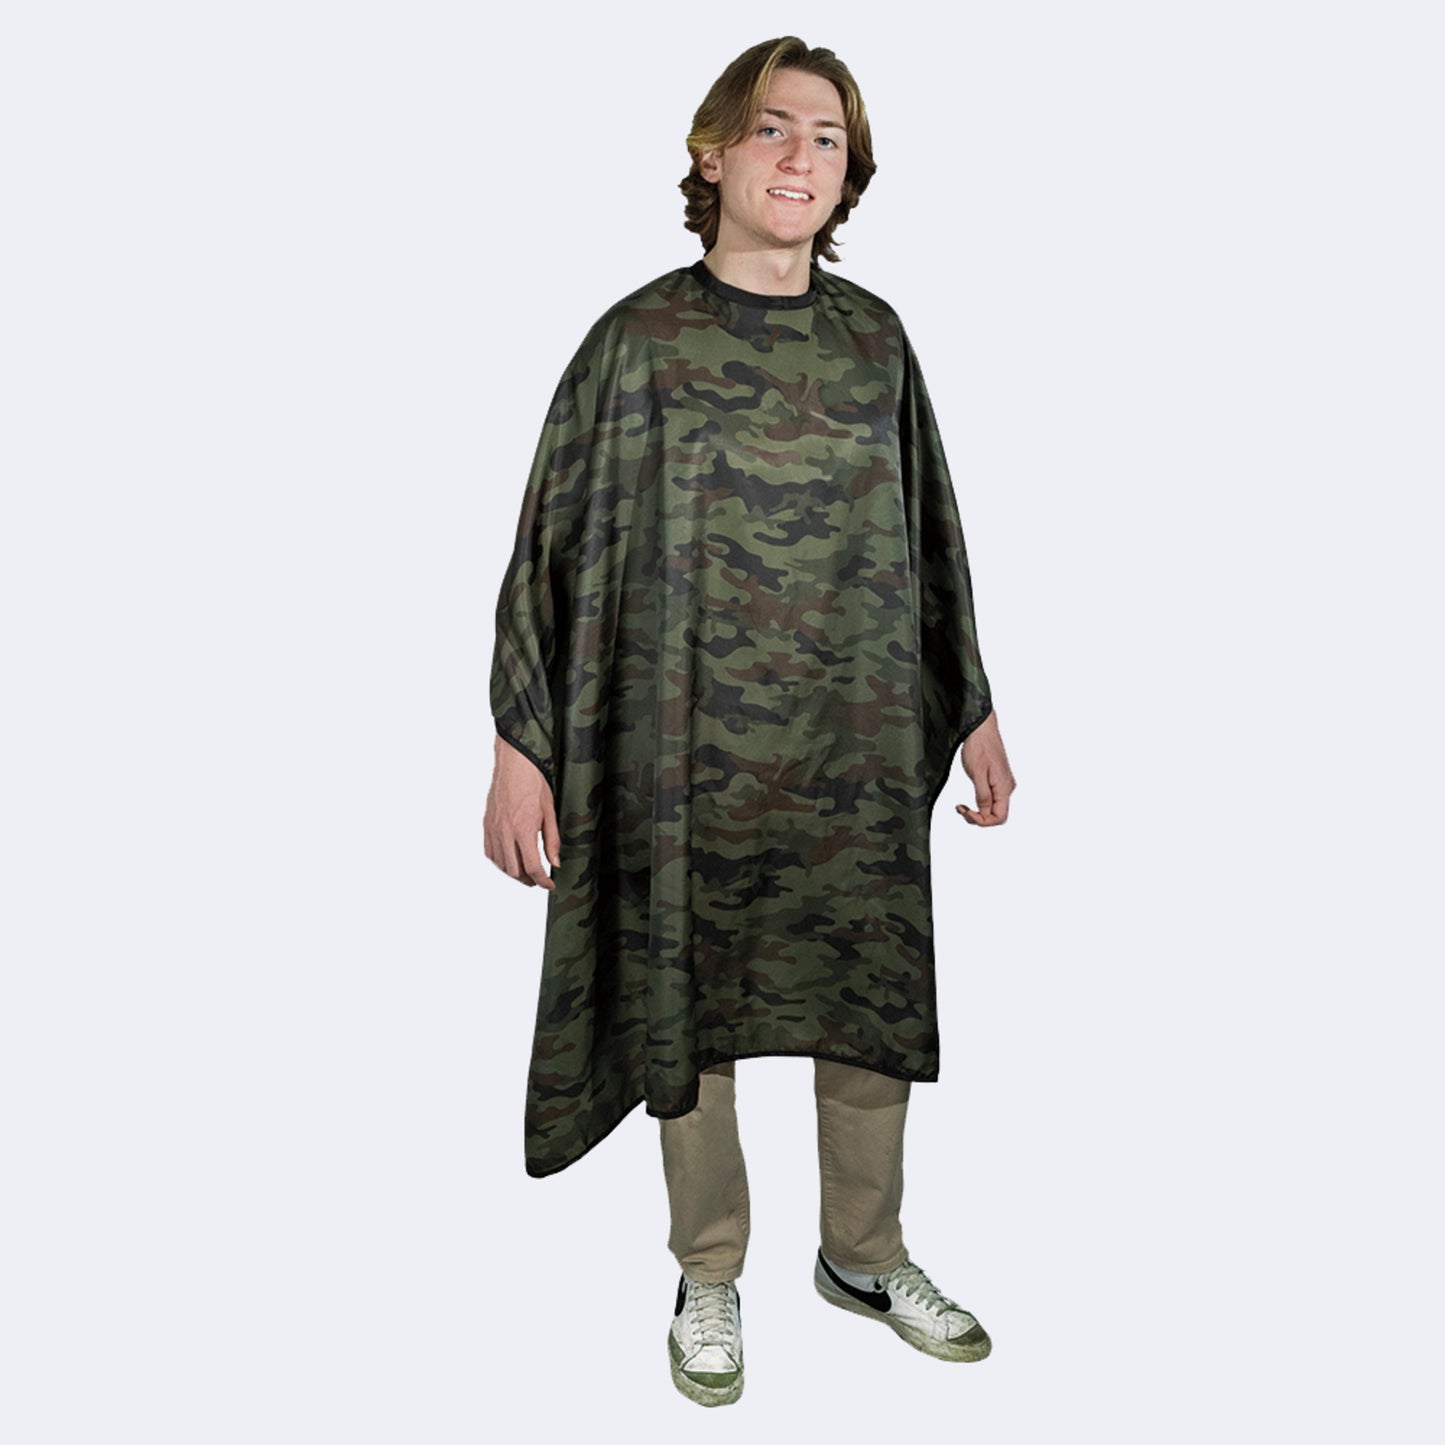 BabylissPRO Deluxe Cape with Camouflage Design